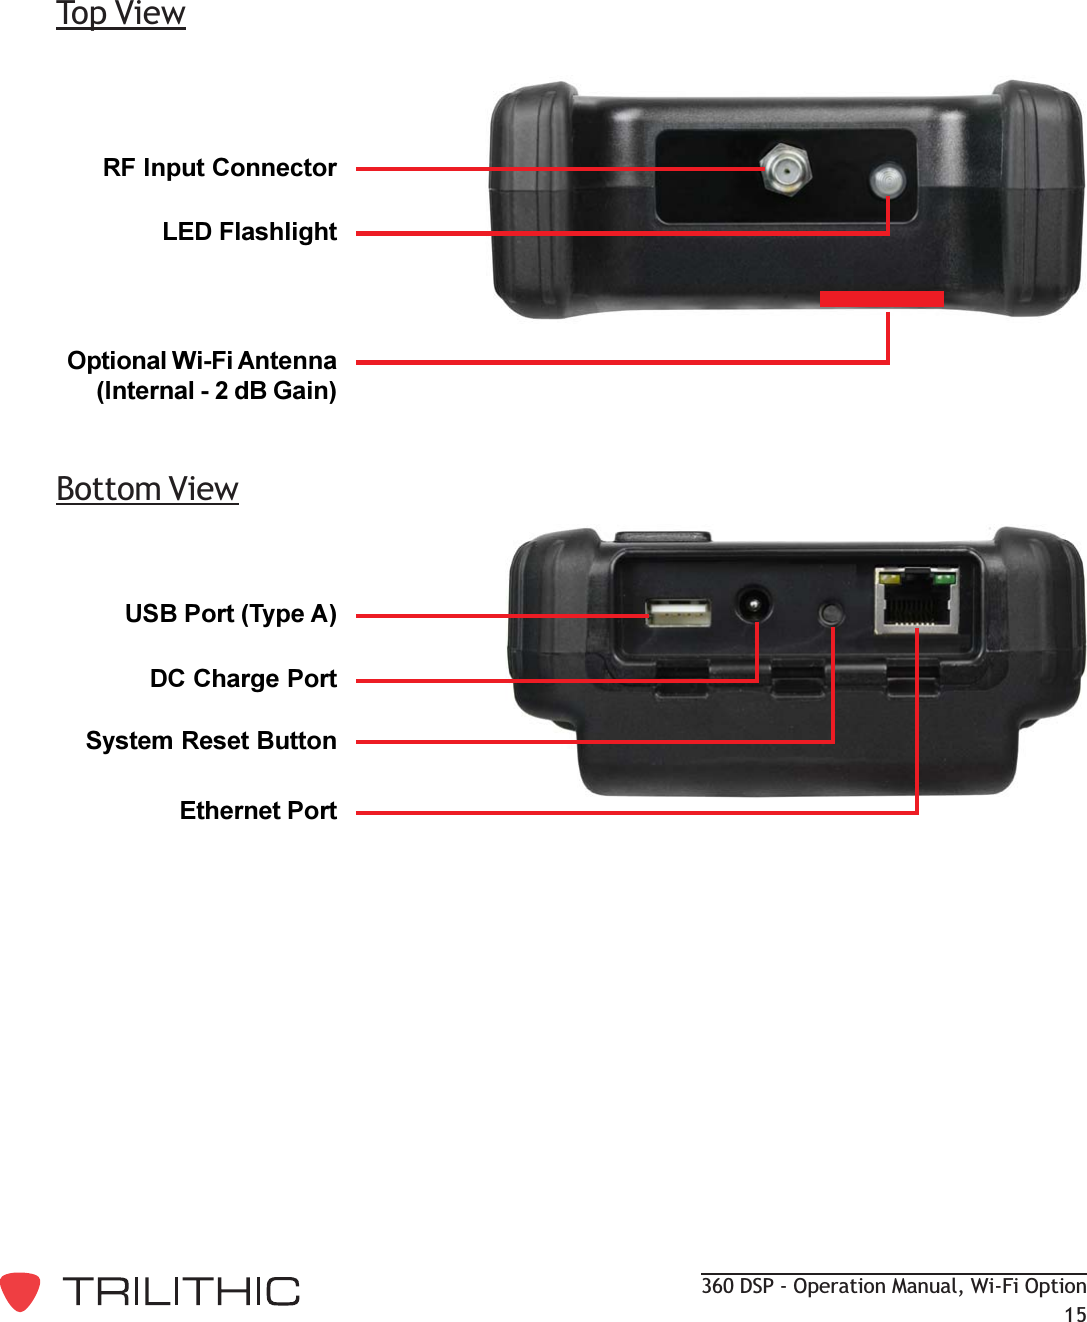 360 DSP - Operation Manual, Wi-Fi Option15Bottom ViewTop ViewRF Input ConnectorLED FlashlightOptional Wi-Fi Antenna(Internal - 2 dB Gain)USB Port (Type A)DC Charge PortSystem Reset ButtonEthernet Port